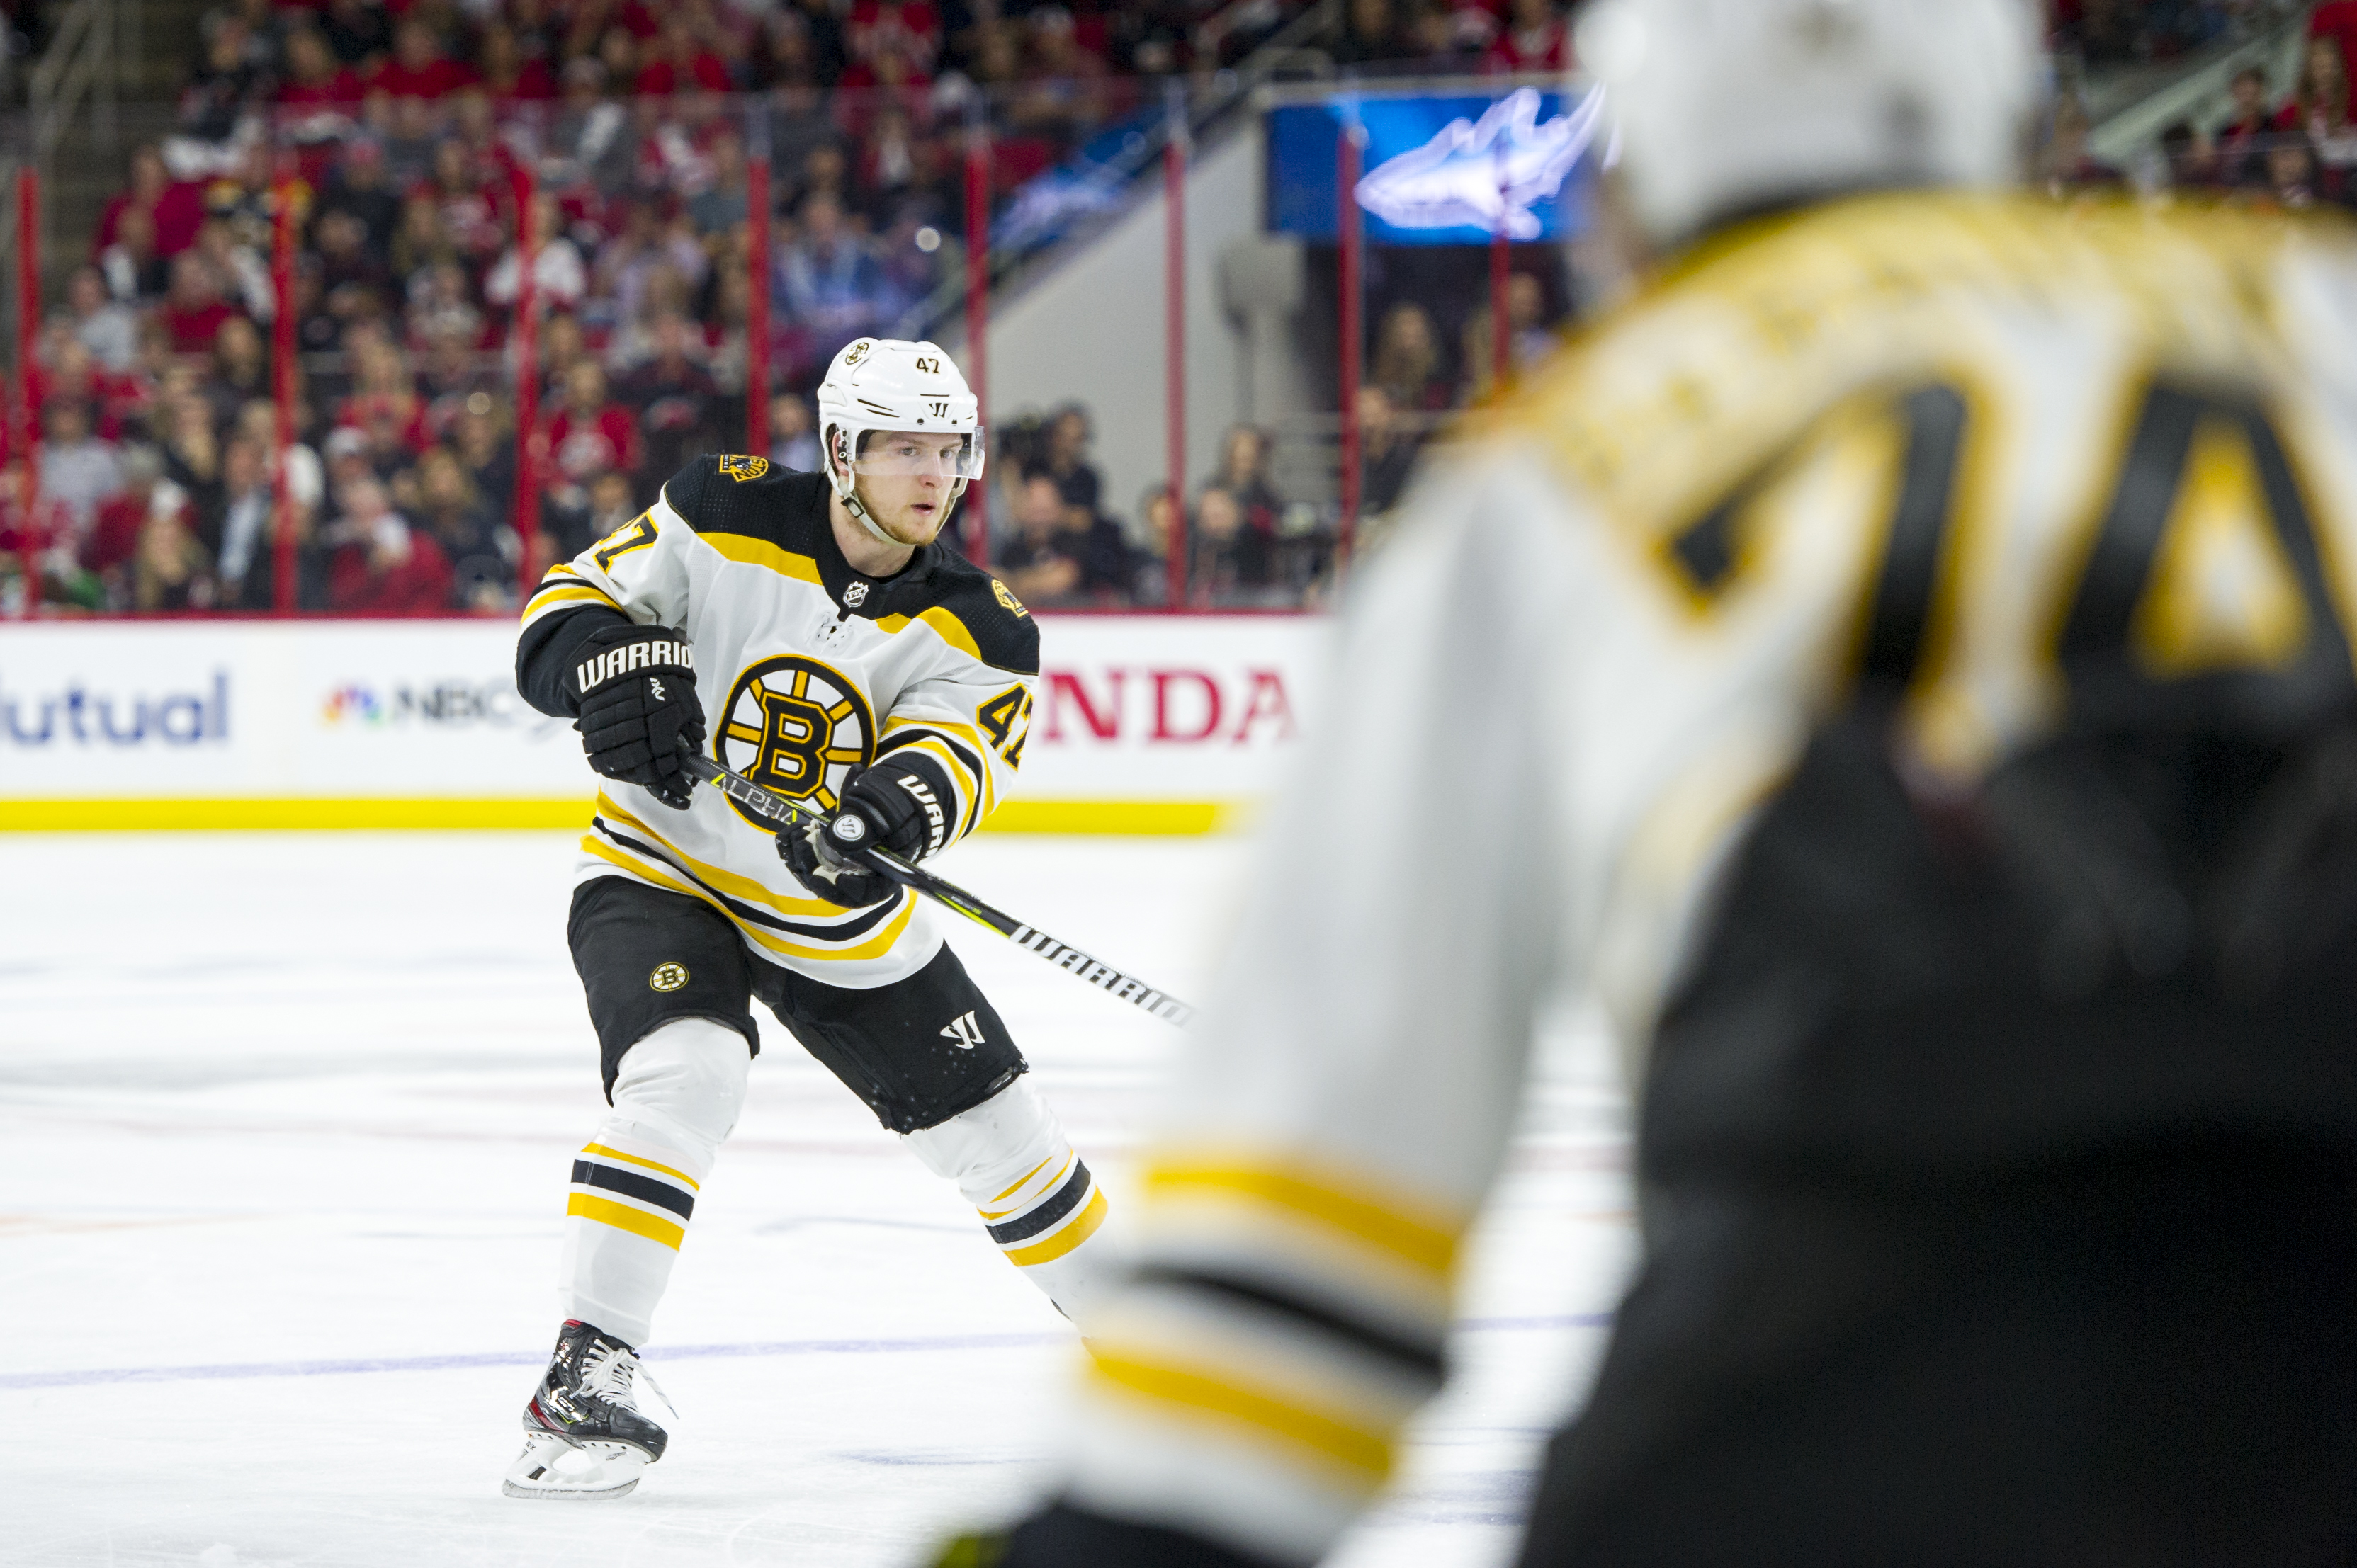 Bergeron, Krug Pace Bruin Domination in St. Louis